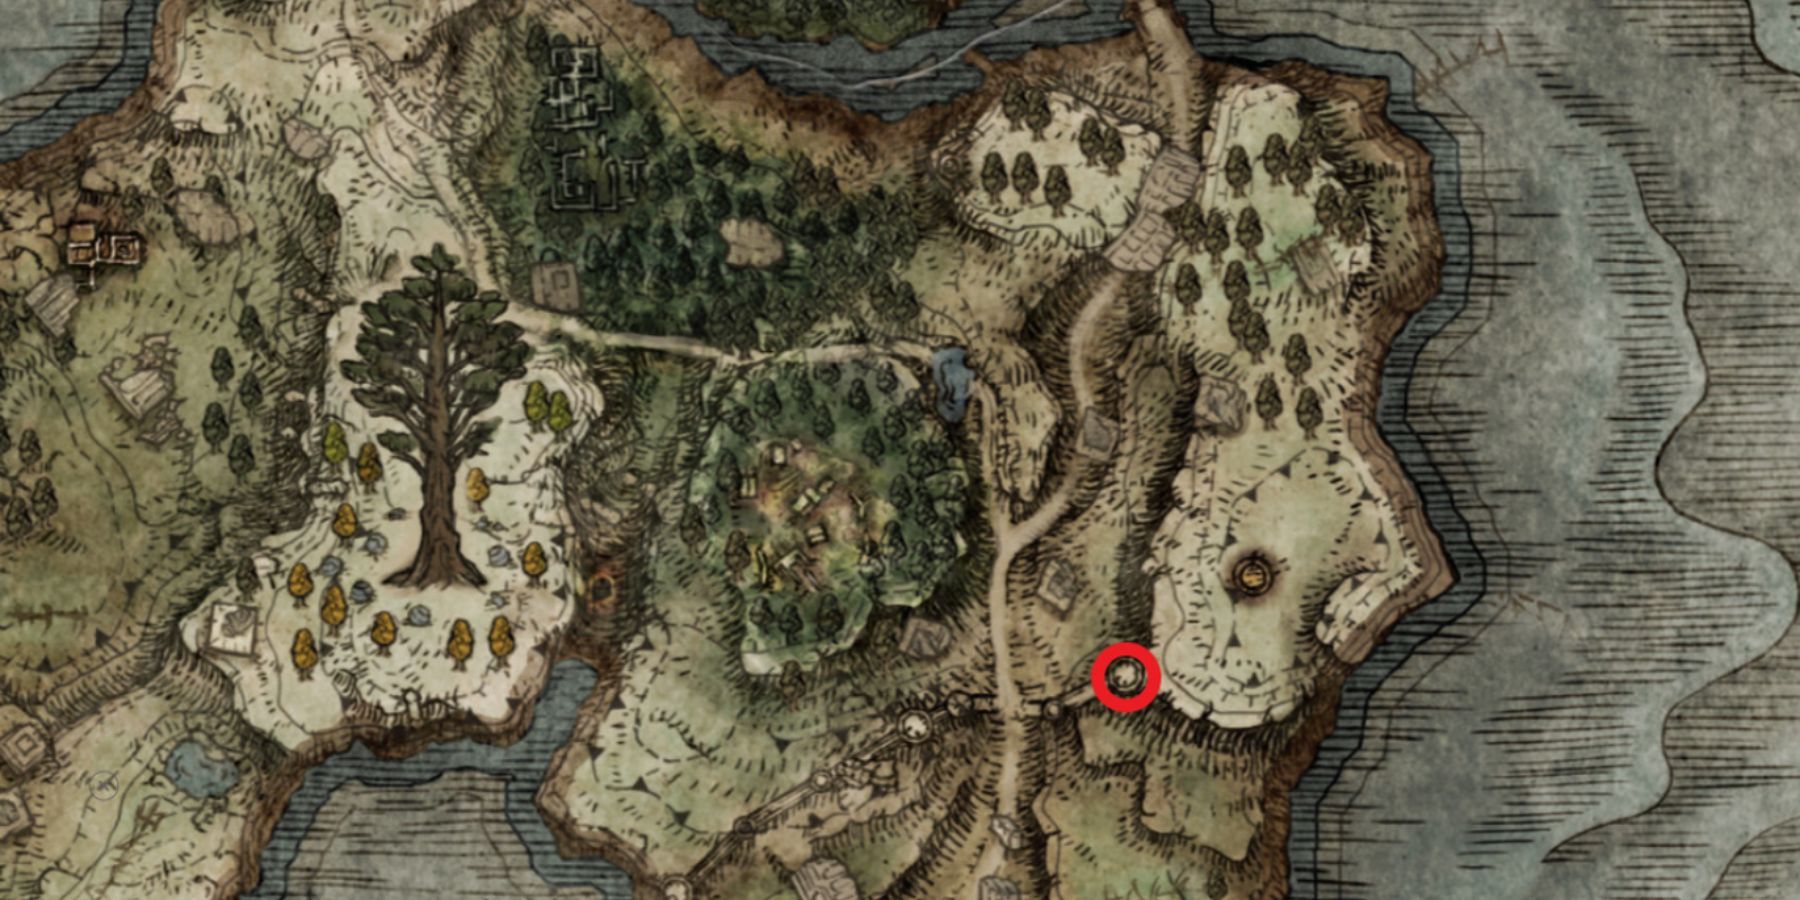 Great Turtle Shell location on the map in Elden Ring